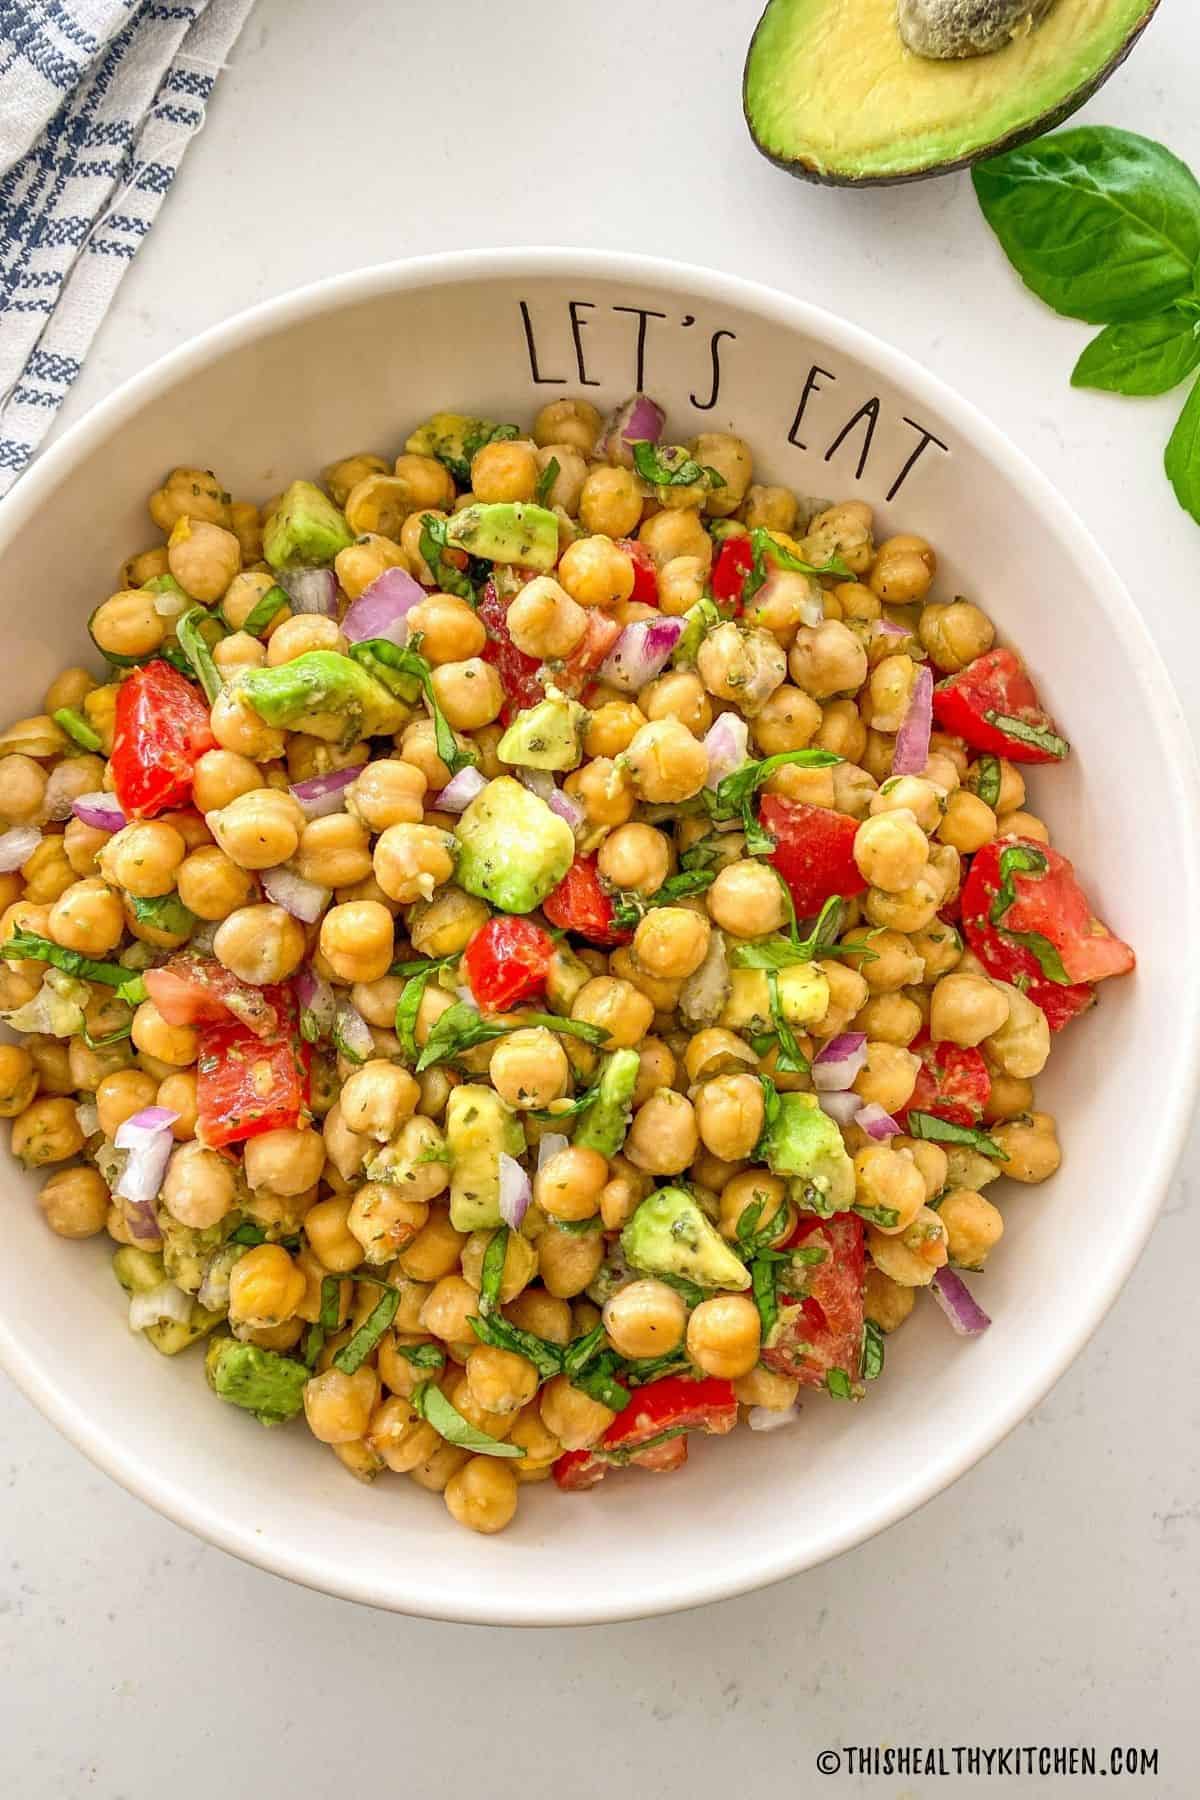 Chickpea, avocado and tomato salad in white serving bowl.